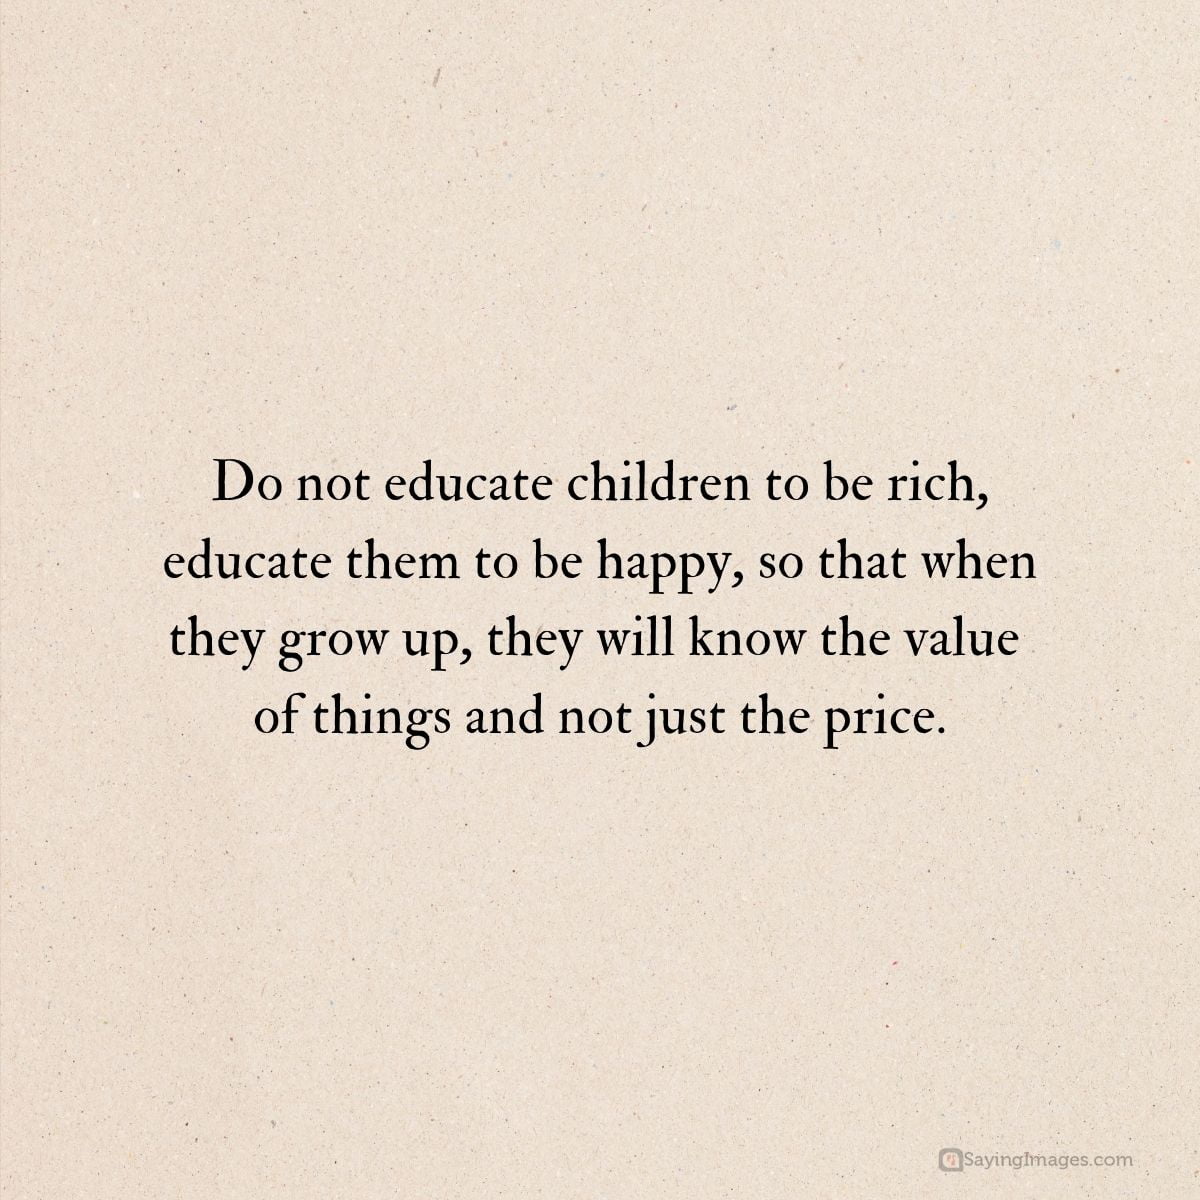 Do not educate children to be rich